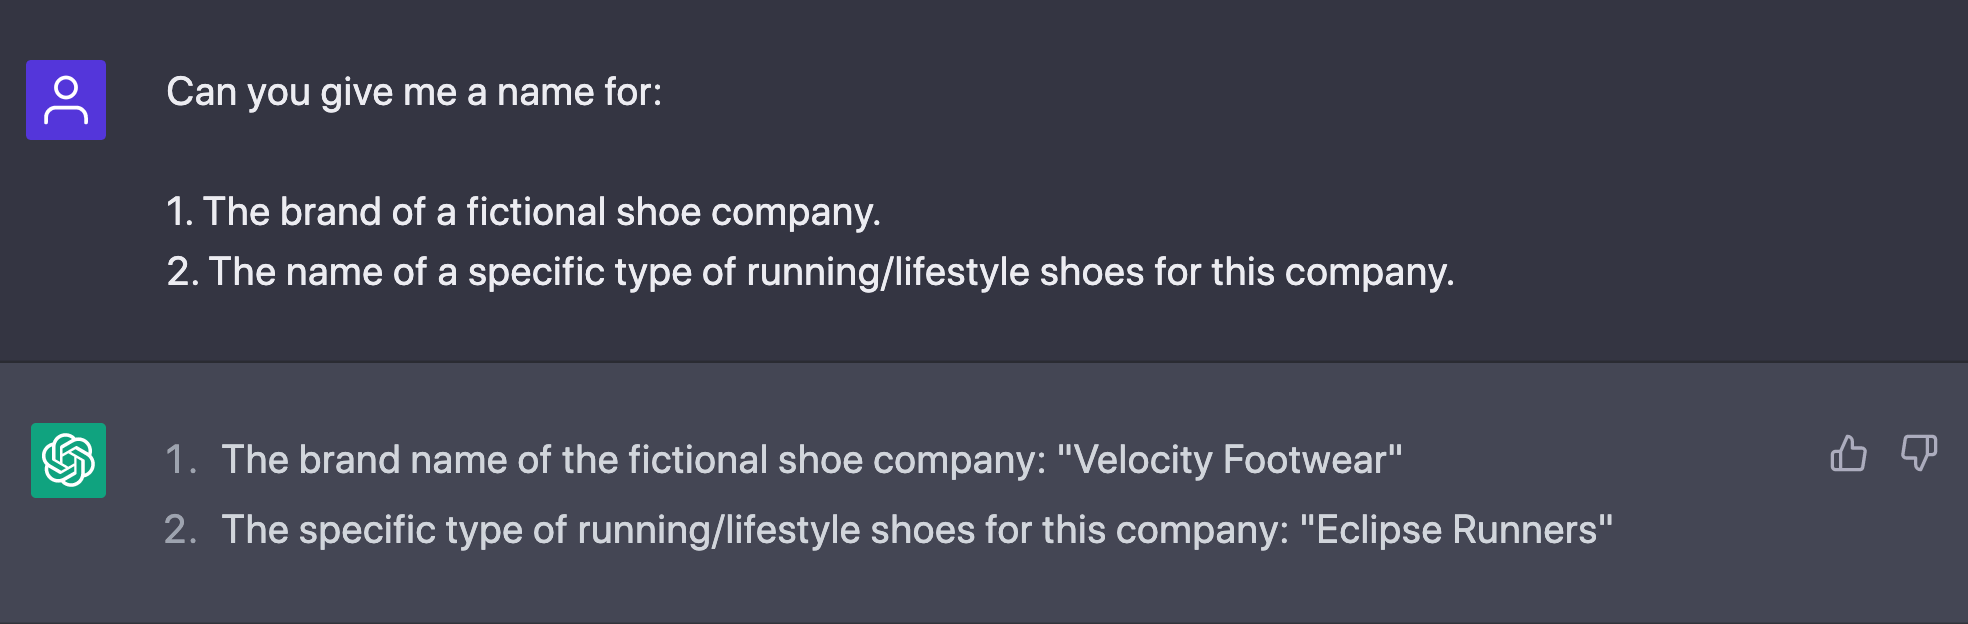 Initial prompt to Chat GPT to generate the name of a fictional shoe brand